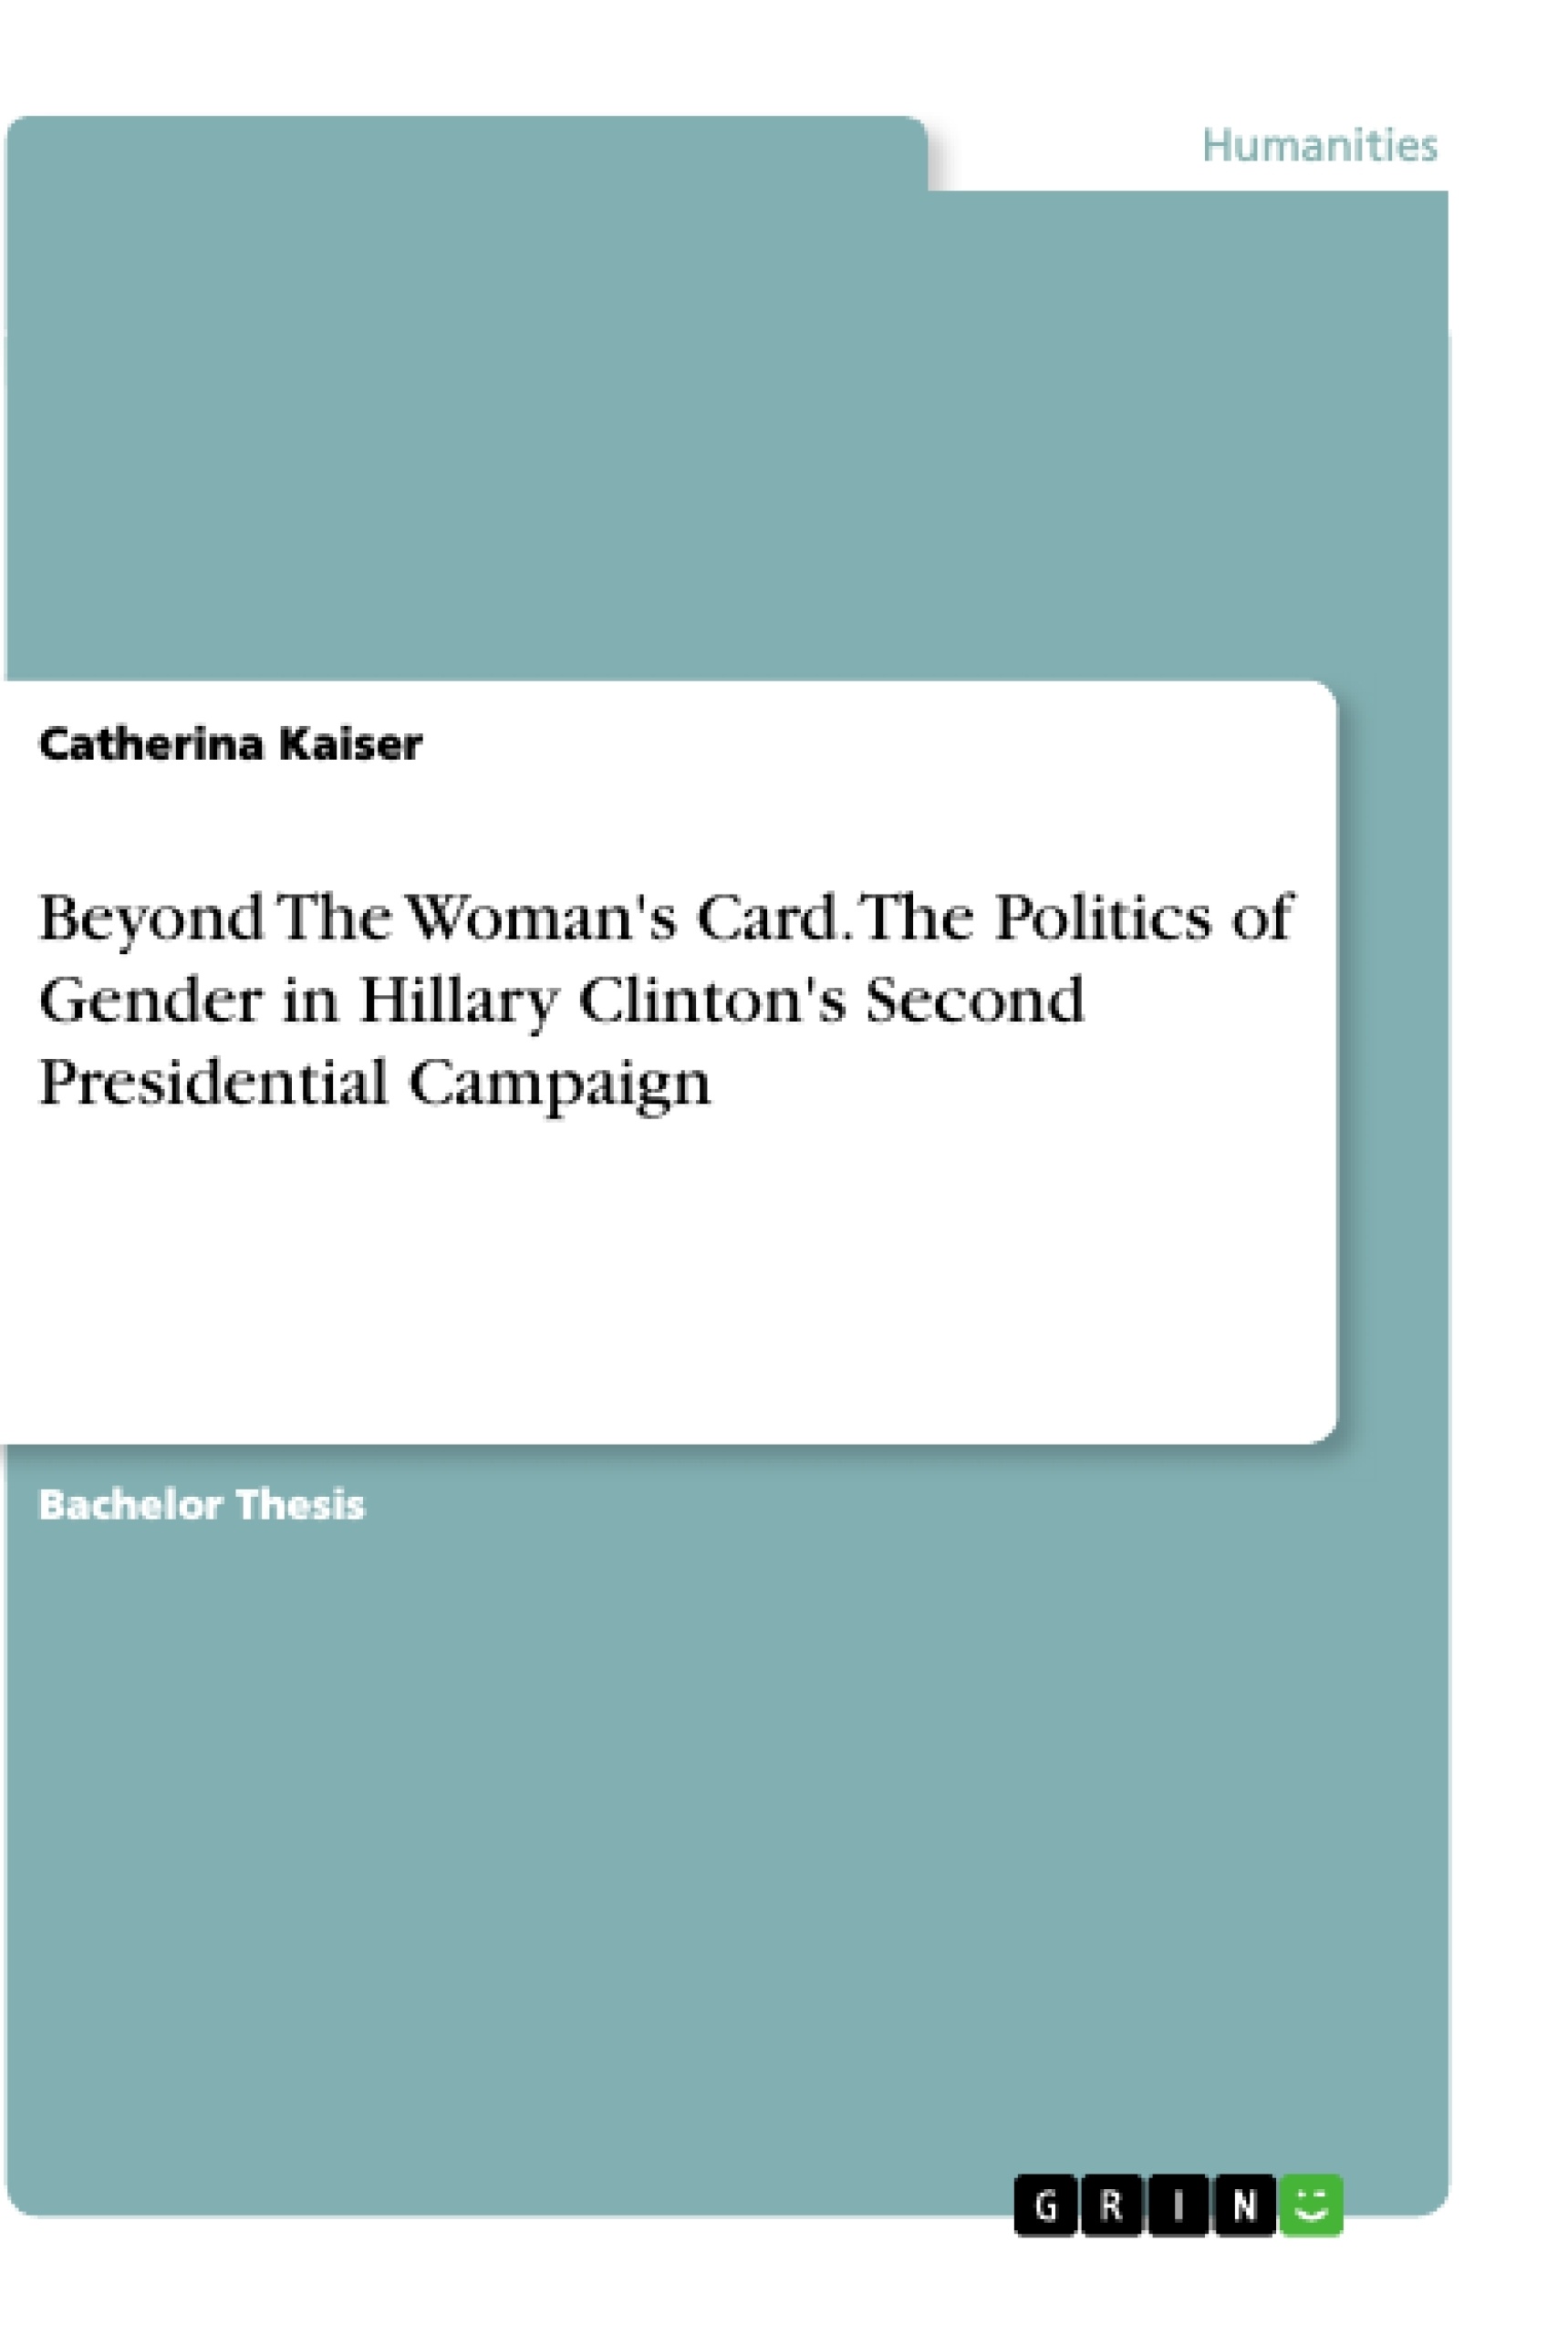 Titre: Beyond The Woman's Card. The Politics of Gender in Hillary Clinton's Second Presidential Campaign